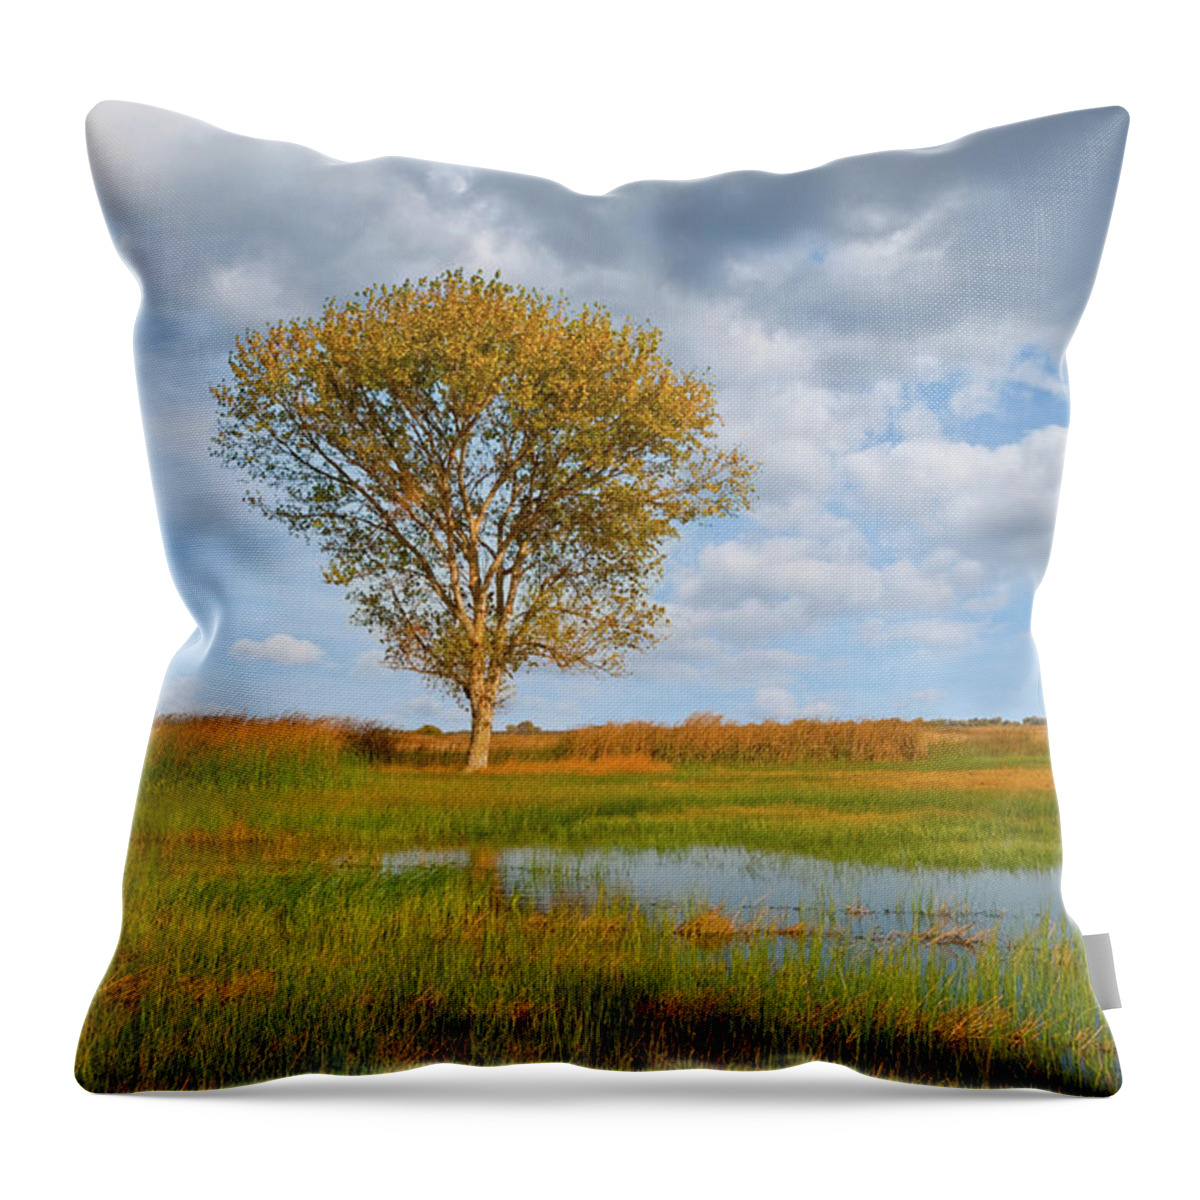 Autumn Throw Pillow featuring the photograph Lone Tree by a Wetland by Jeff Goulden